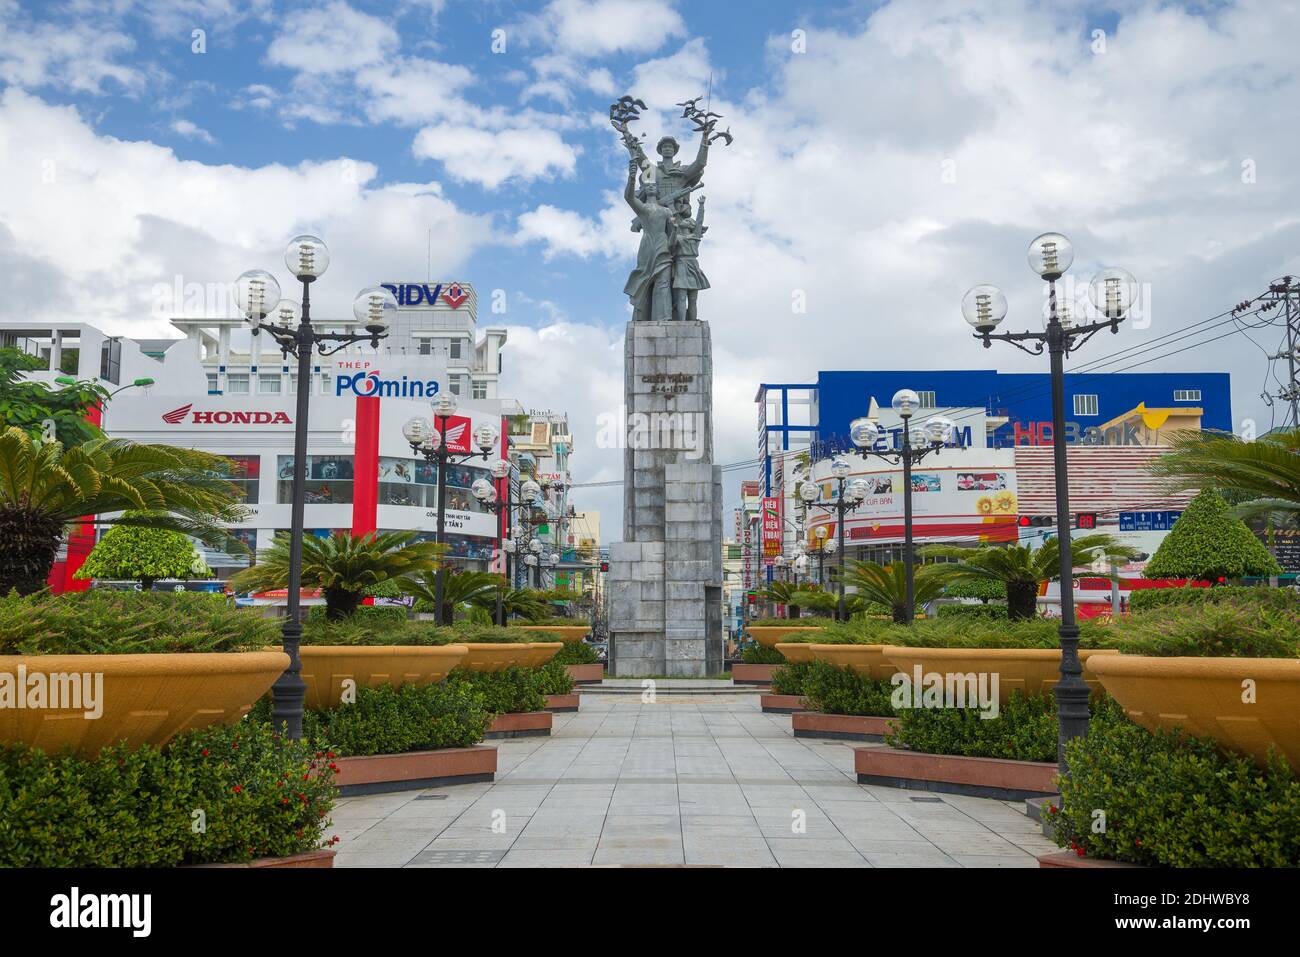 NHA TRANG, VIETNAM - DECEMBER 31, 2015: Monument in honor of the liberation of Nha Trang during the Vietnam War in the town square Stock Photo